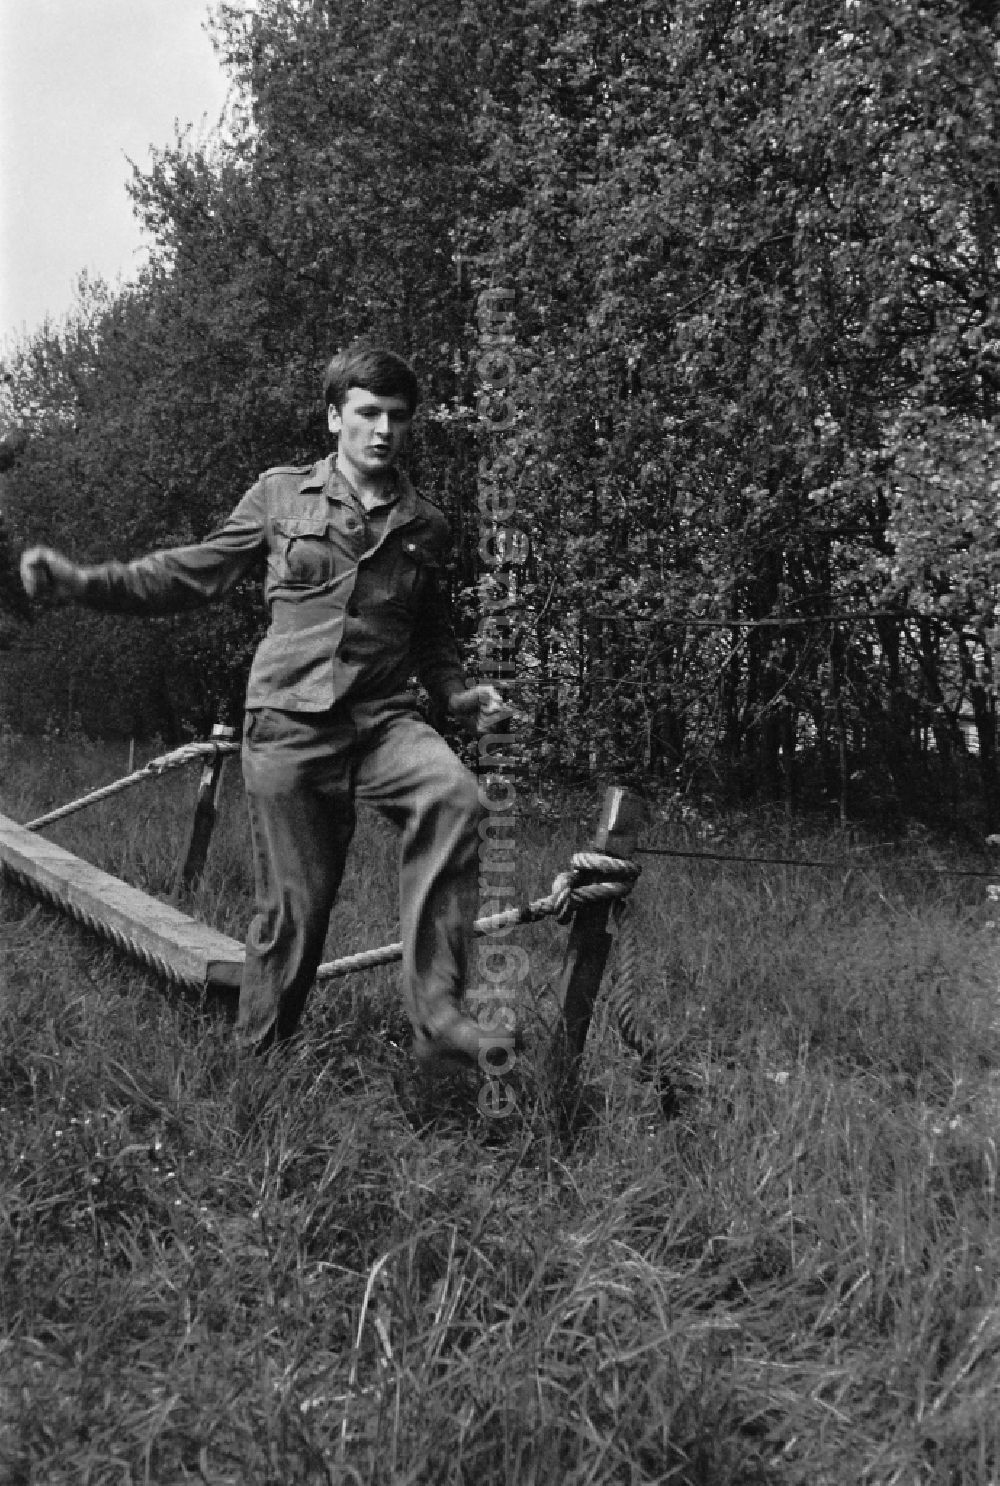 GDR picture archive: Stechlin - Practical training with a pre-military character in preparation for military service in der GST - Gesellschaft fuer Sport & Technik in Stechlin, Brandenburg on the territory of the former GDR, German Democratic Republic